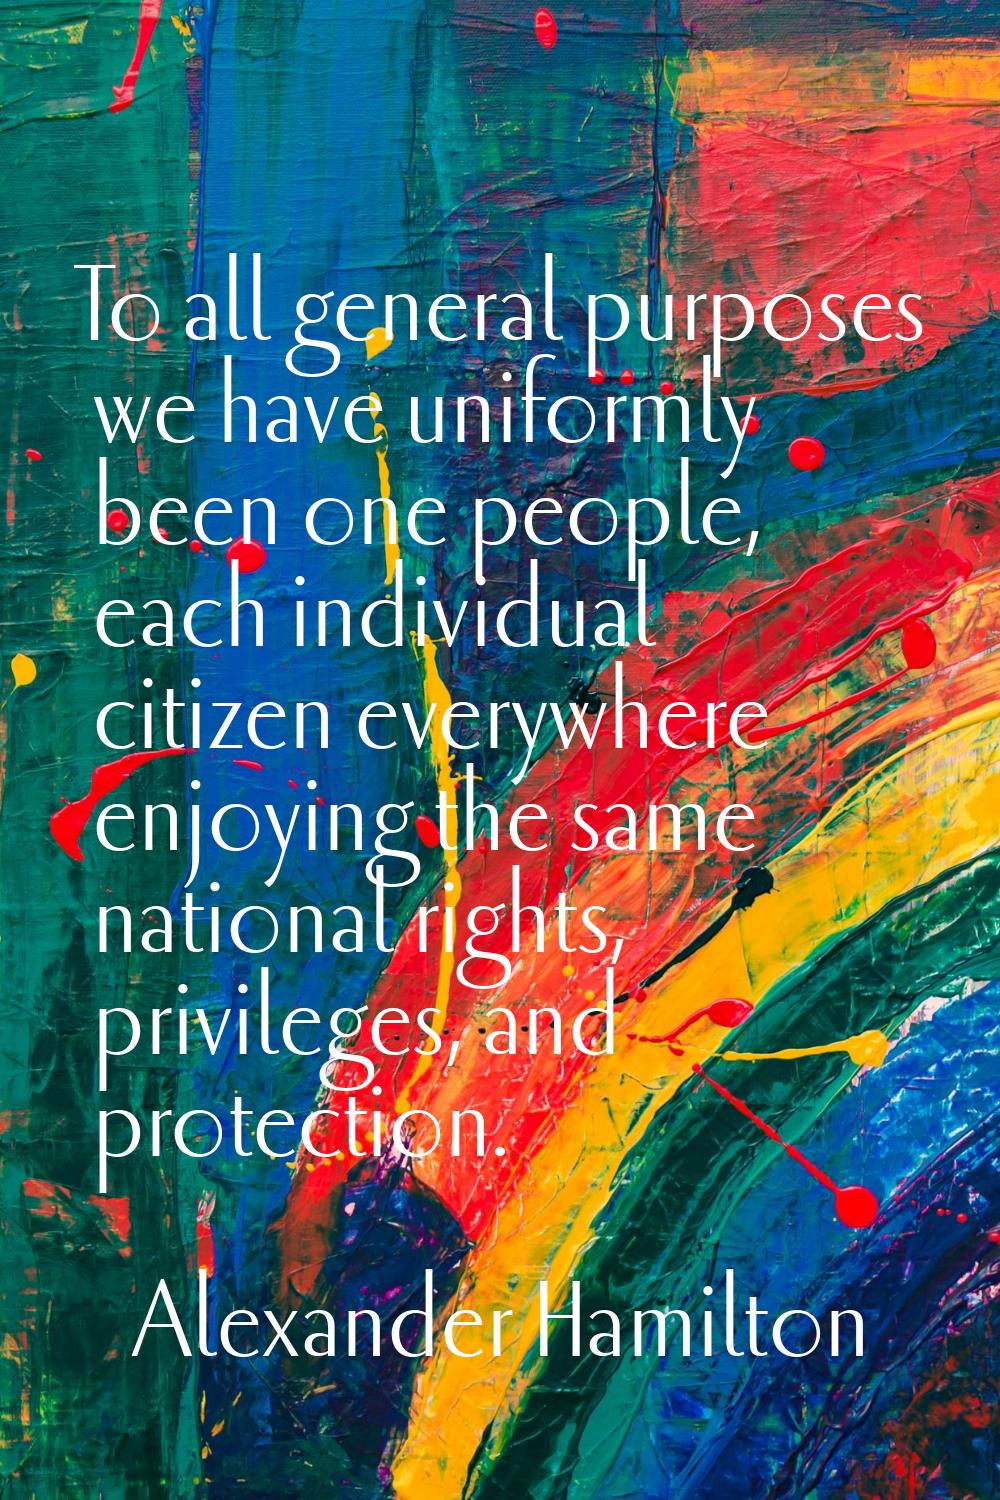 To all general purposes we have uniformly been one people, each individual citizen everywhere enjoy